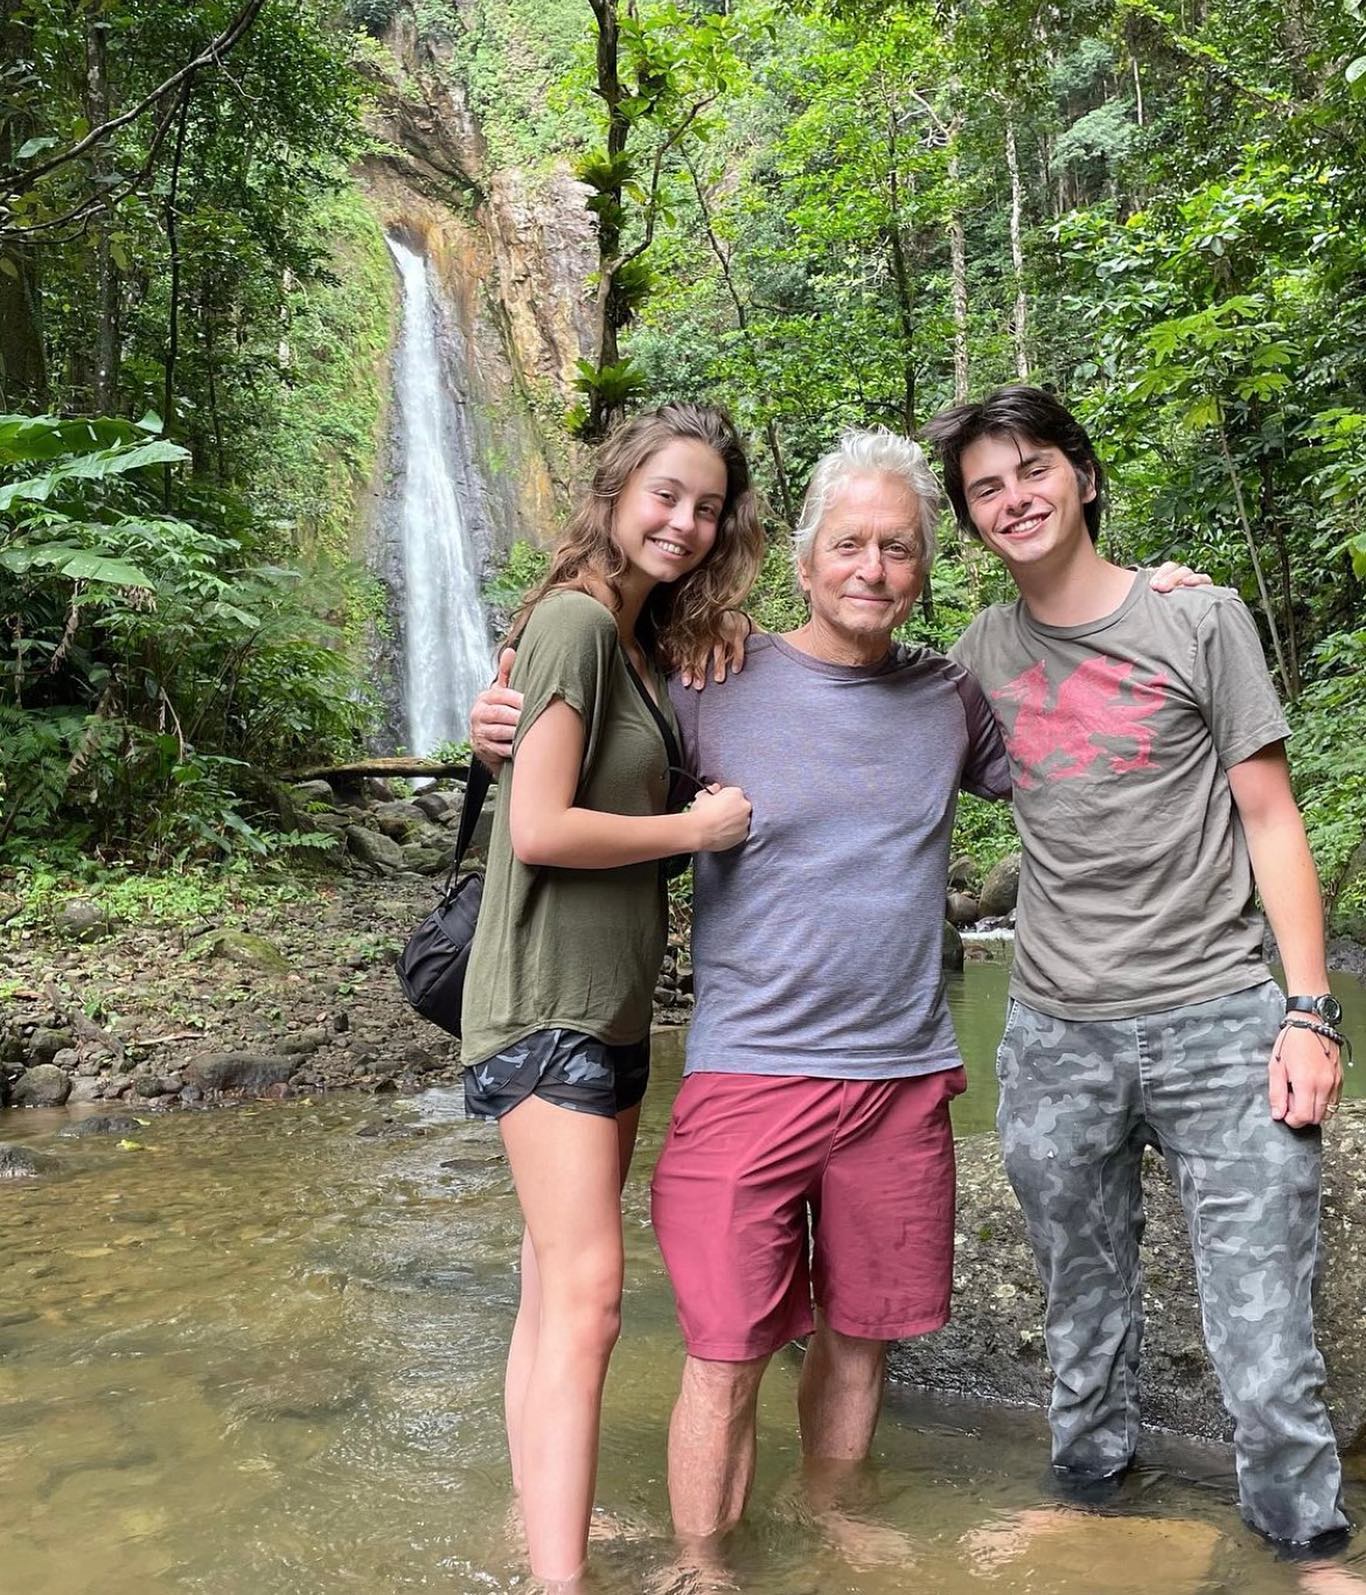 Michael Douglas’ Kids Carys and Dylan Look All Grown Up in Vacation Photo